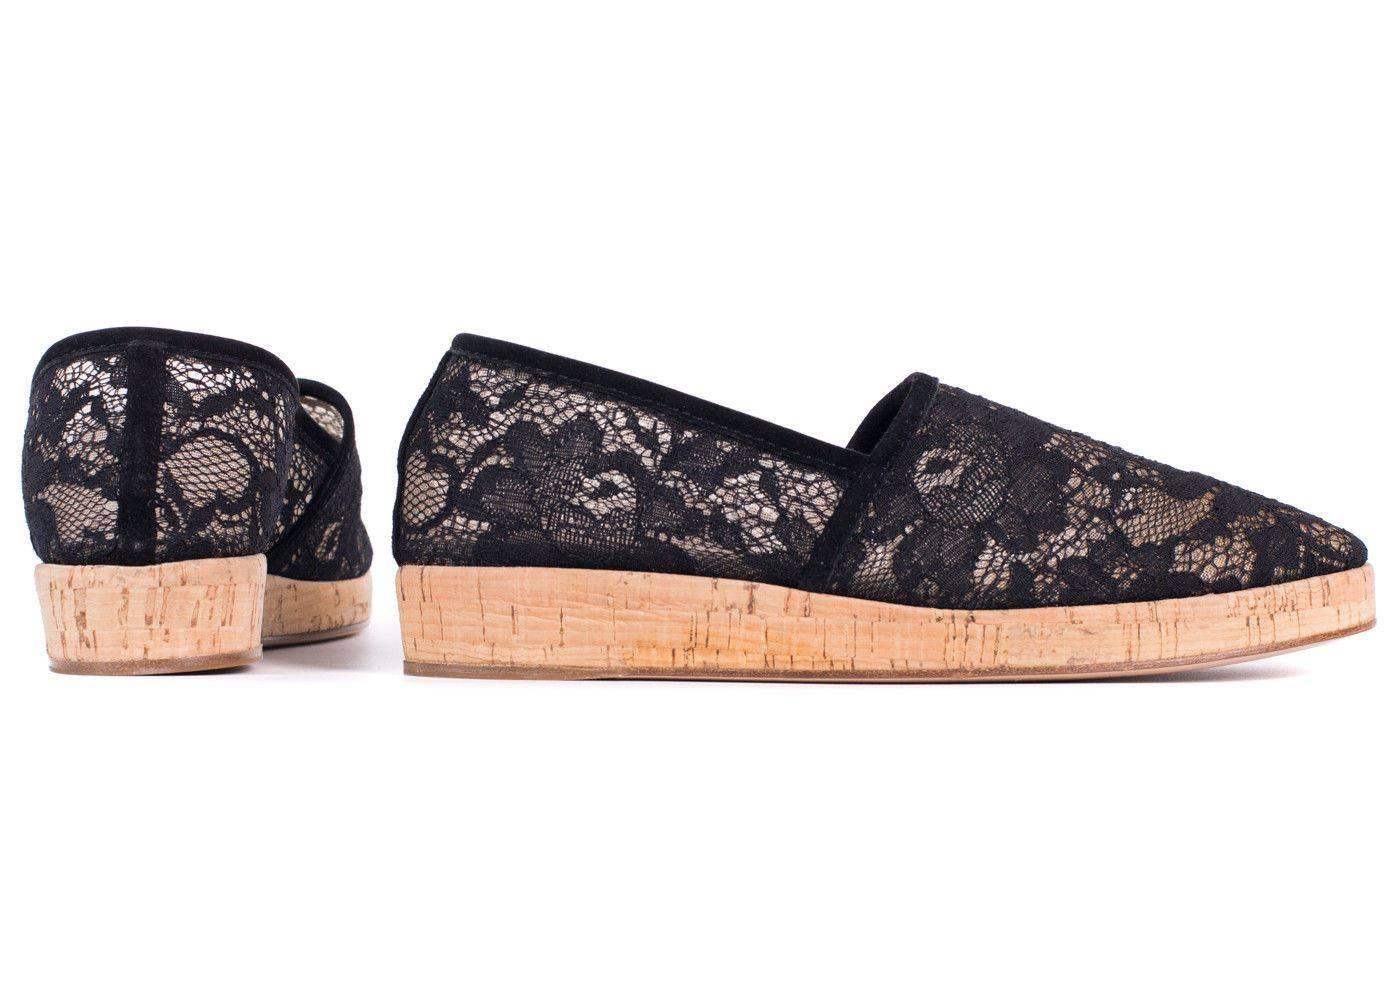 Gianvito Rossi Black Floral Lace Cork Sole Espadrille Flats In New Condition For Sale In Brooklyn, NY